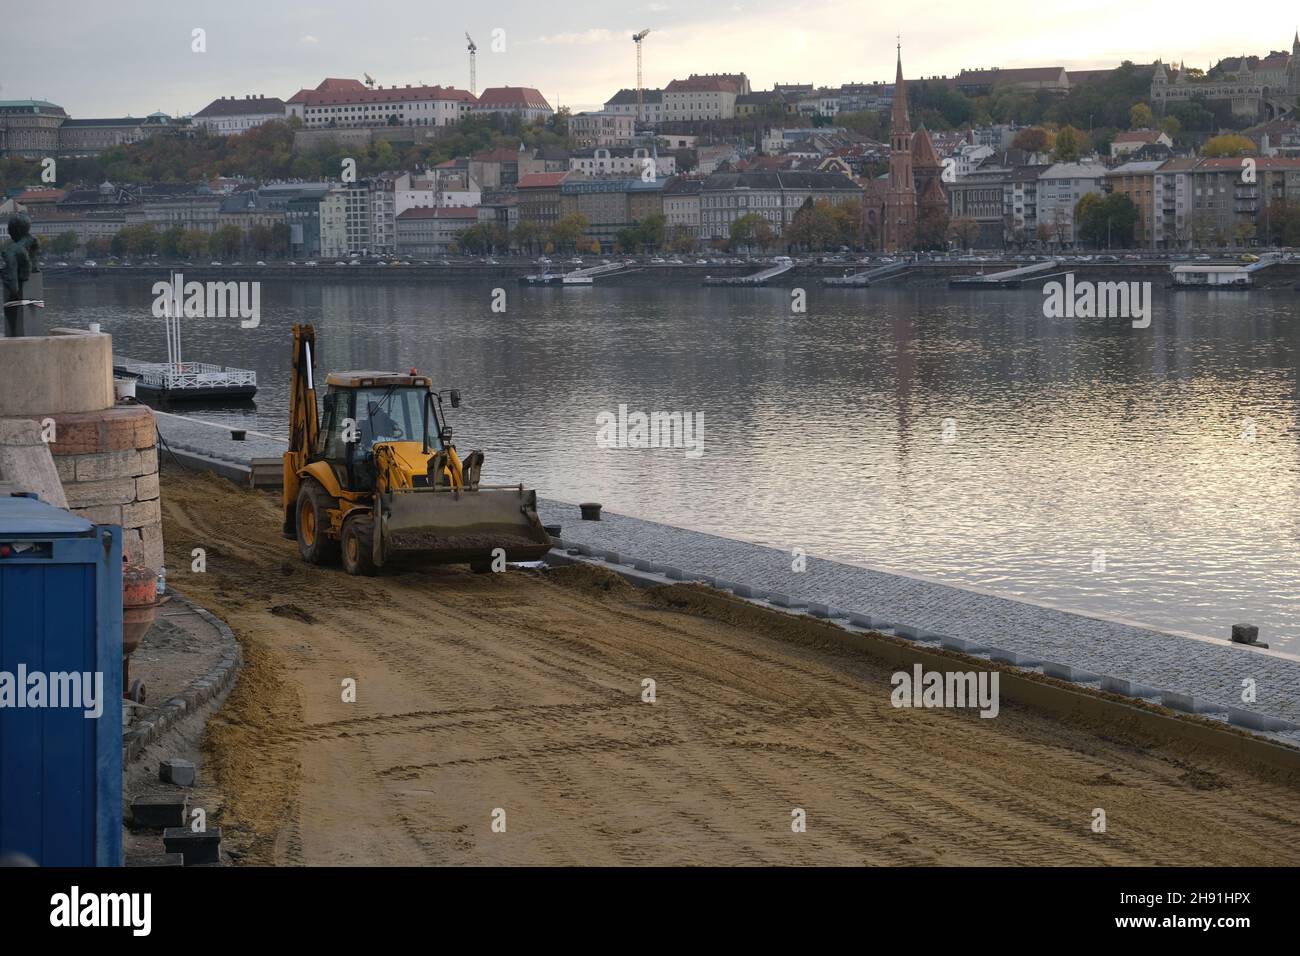 Budapest, Hungary - 1 November 2021: Construction or repair of a road on the Danube river embankment, excavator with a worker, Illustrative Editorial. Stock Photo